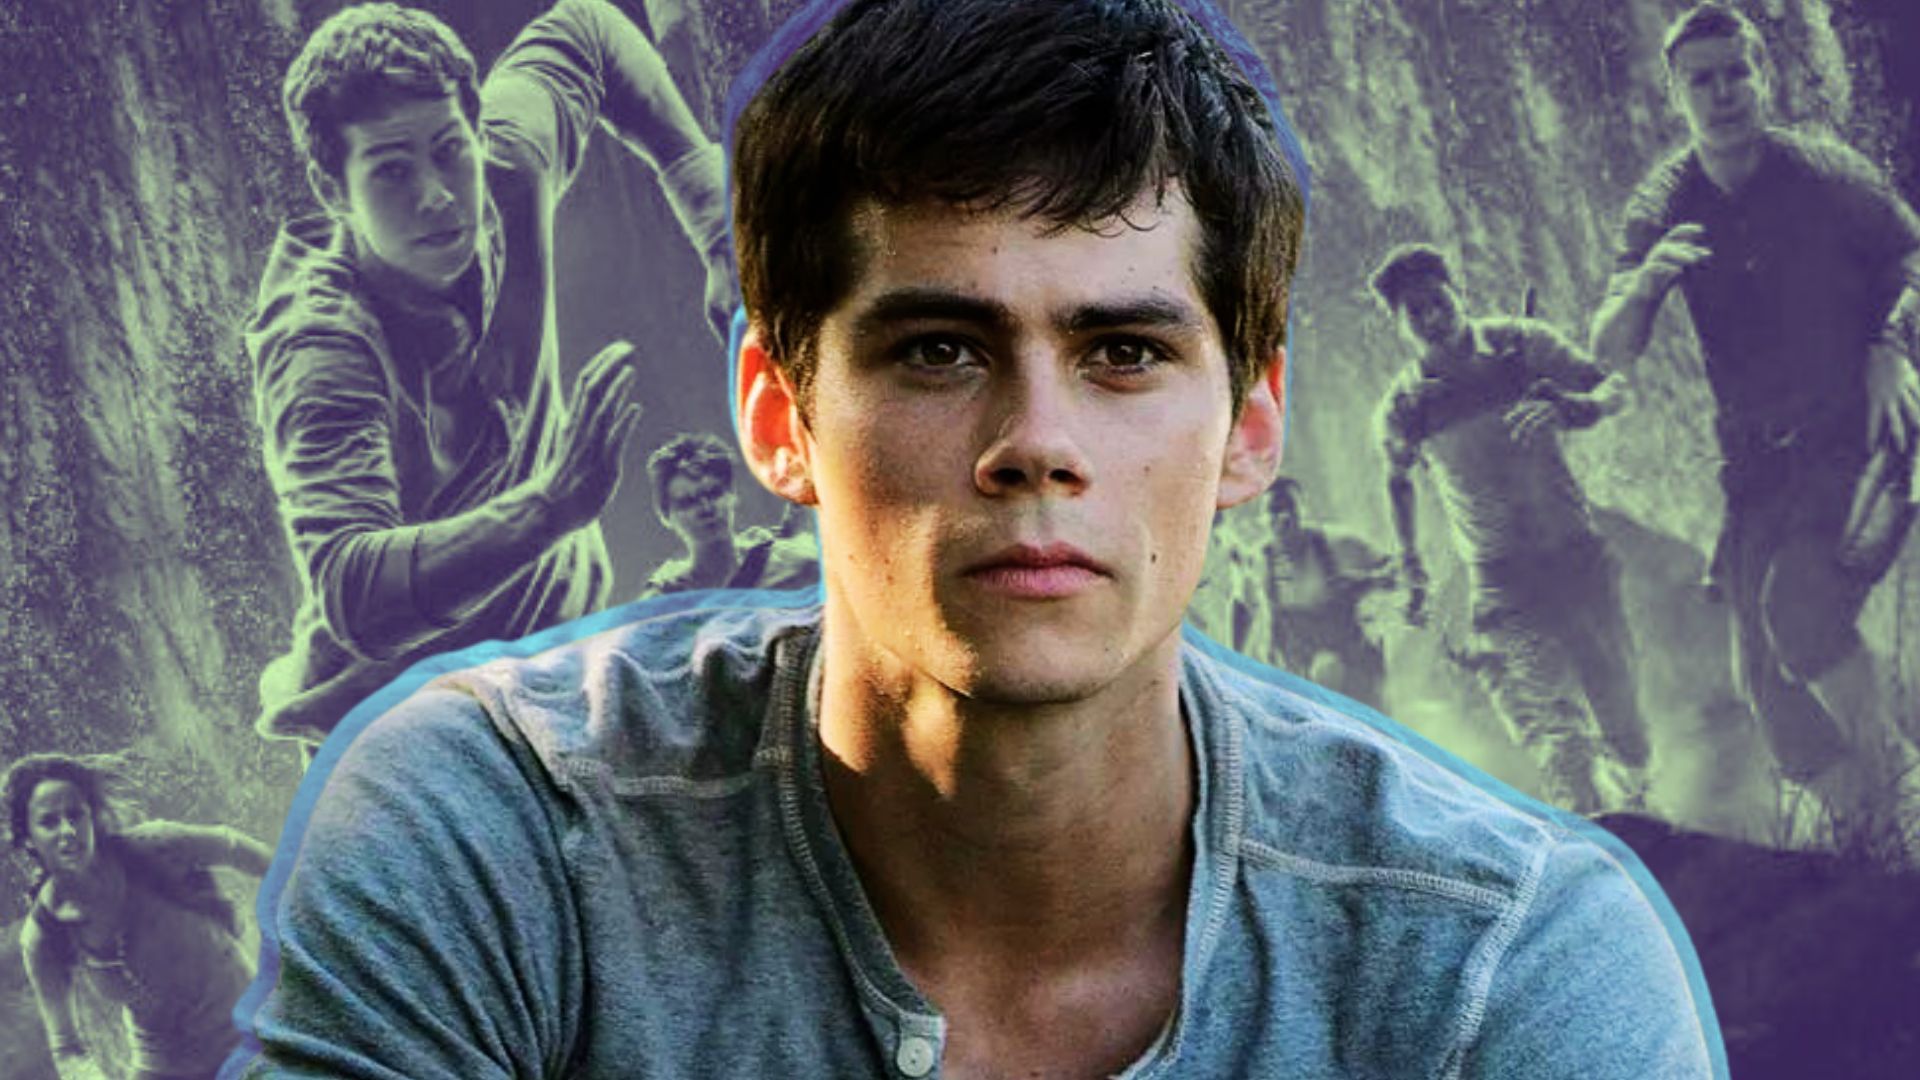 Dylan O' Brien as Thomas in The Maze Runner Series